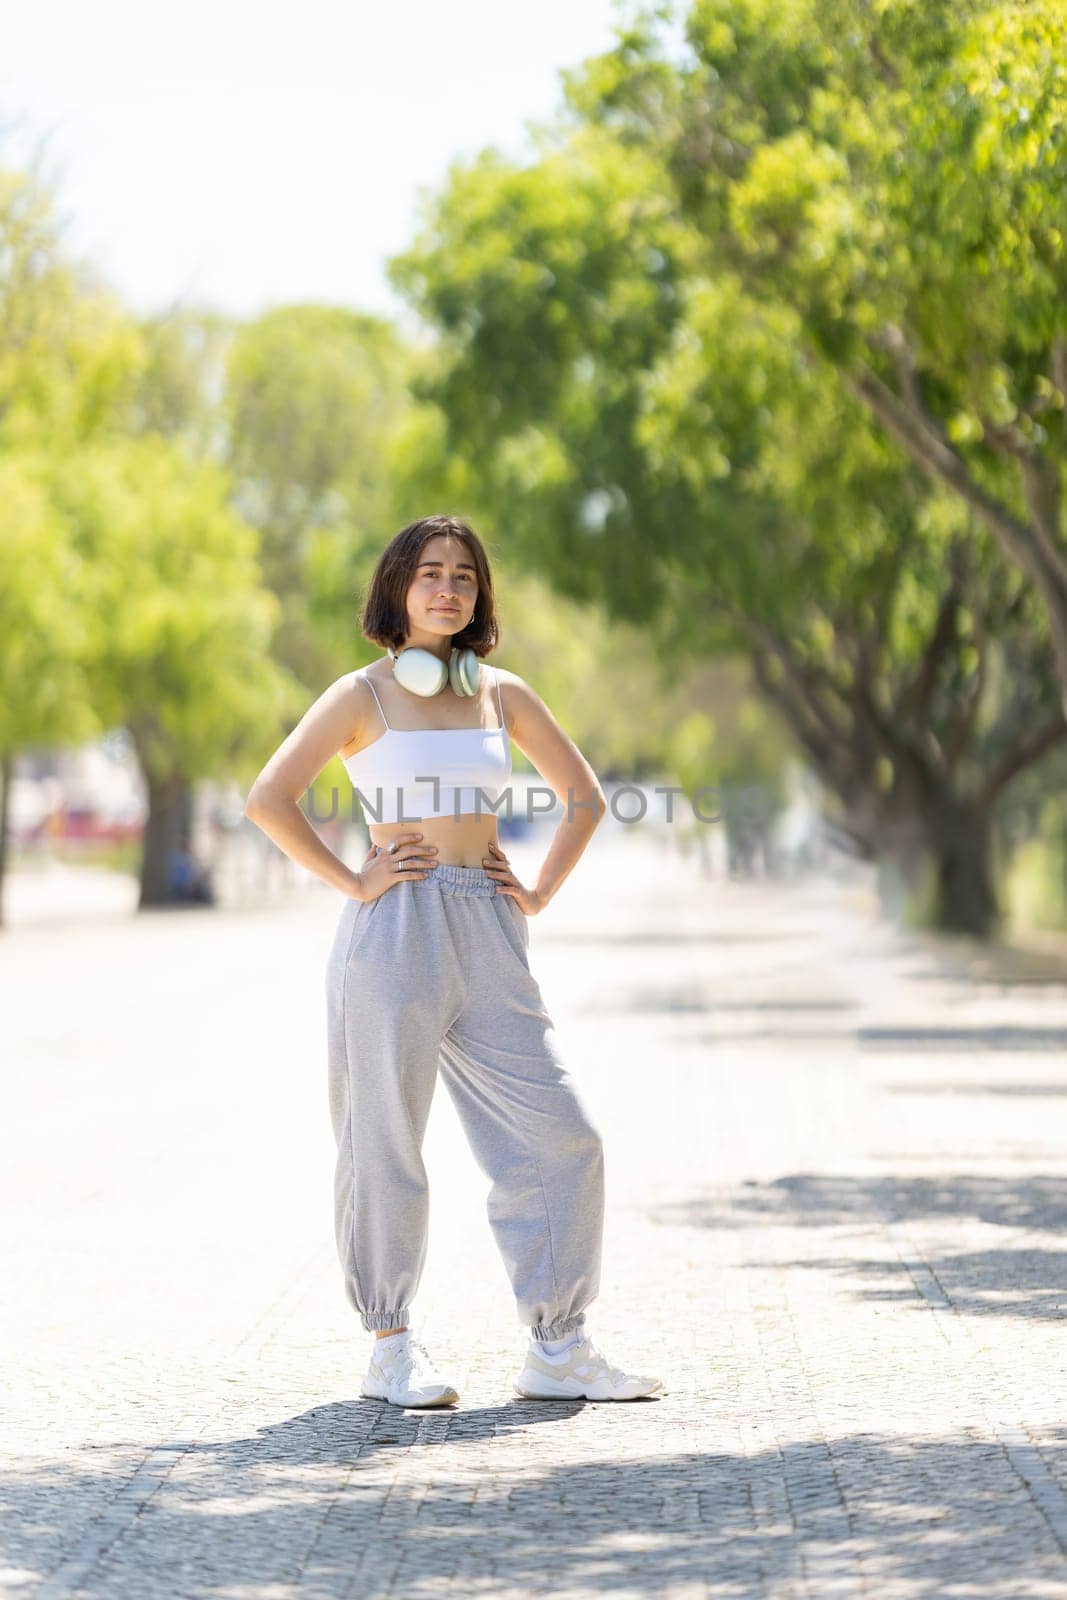 A woman is standing on a sidewalk wearing headphones and a white tank top by Studia72